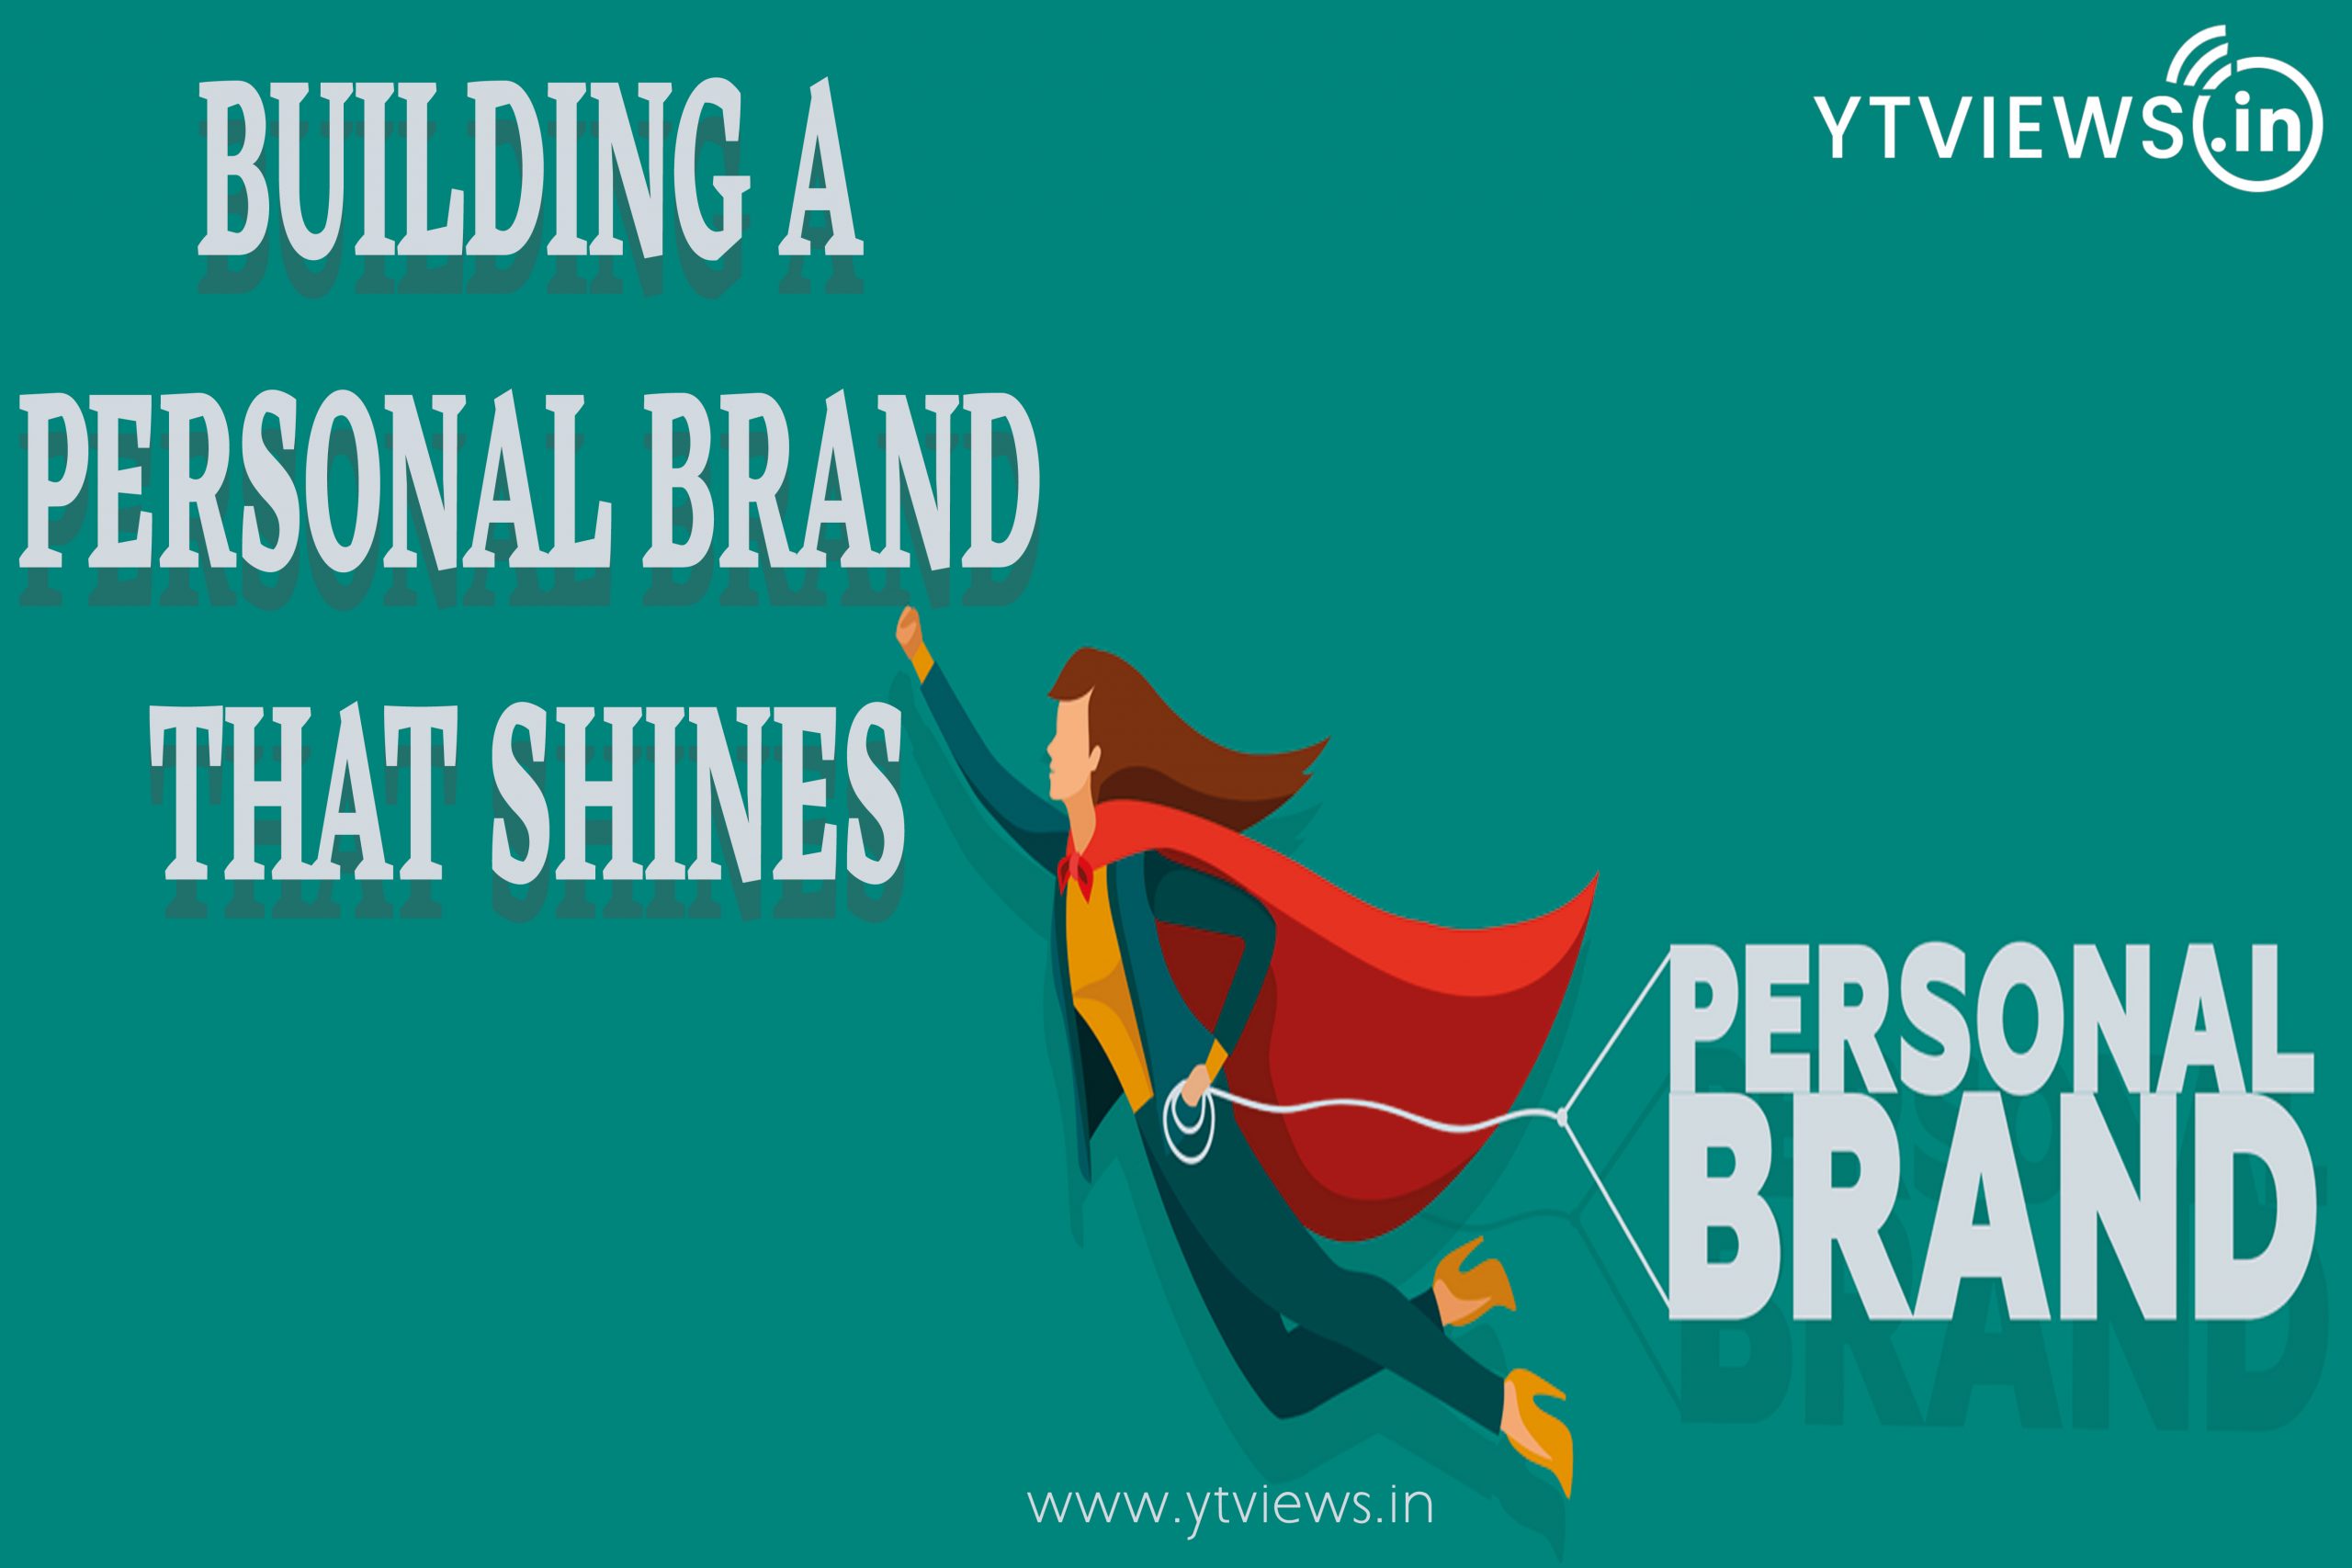 Building a personal brand that shines